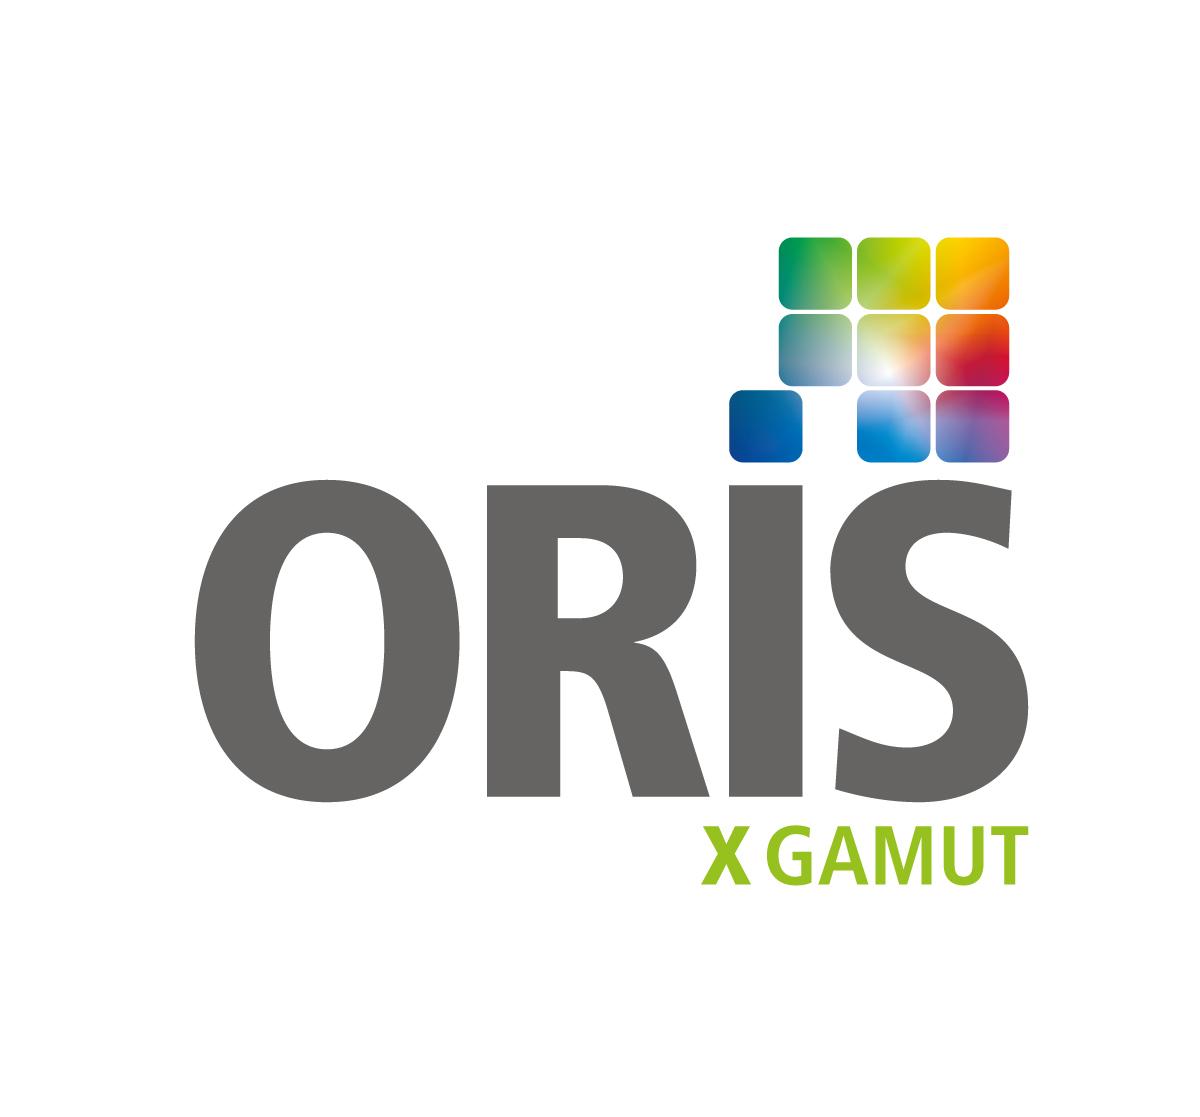 CGS Expands its product portfolio with ORIS X GAMUT